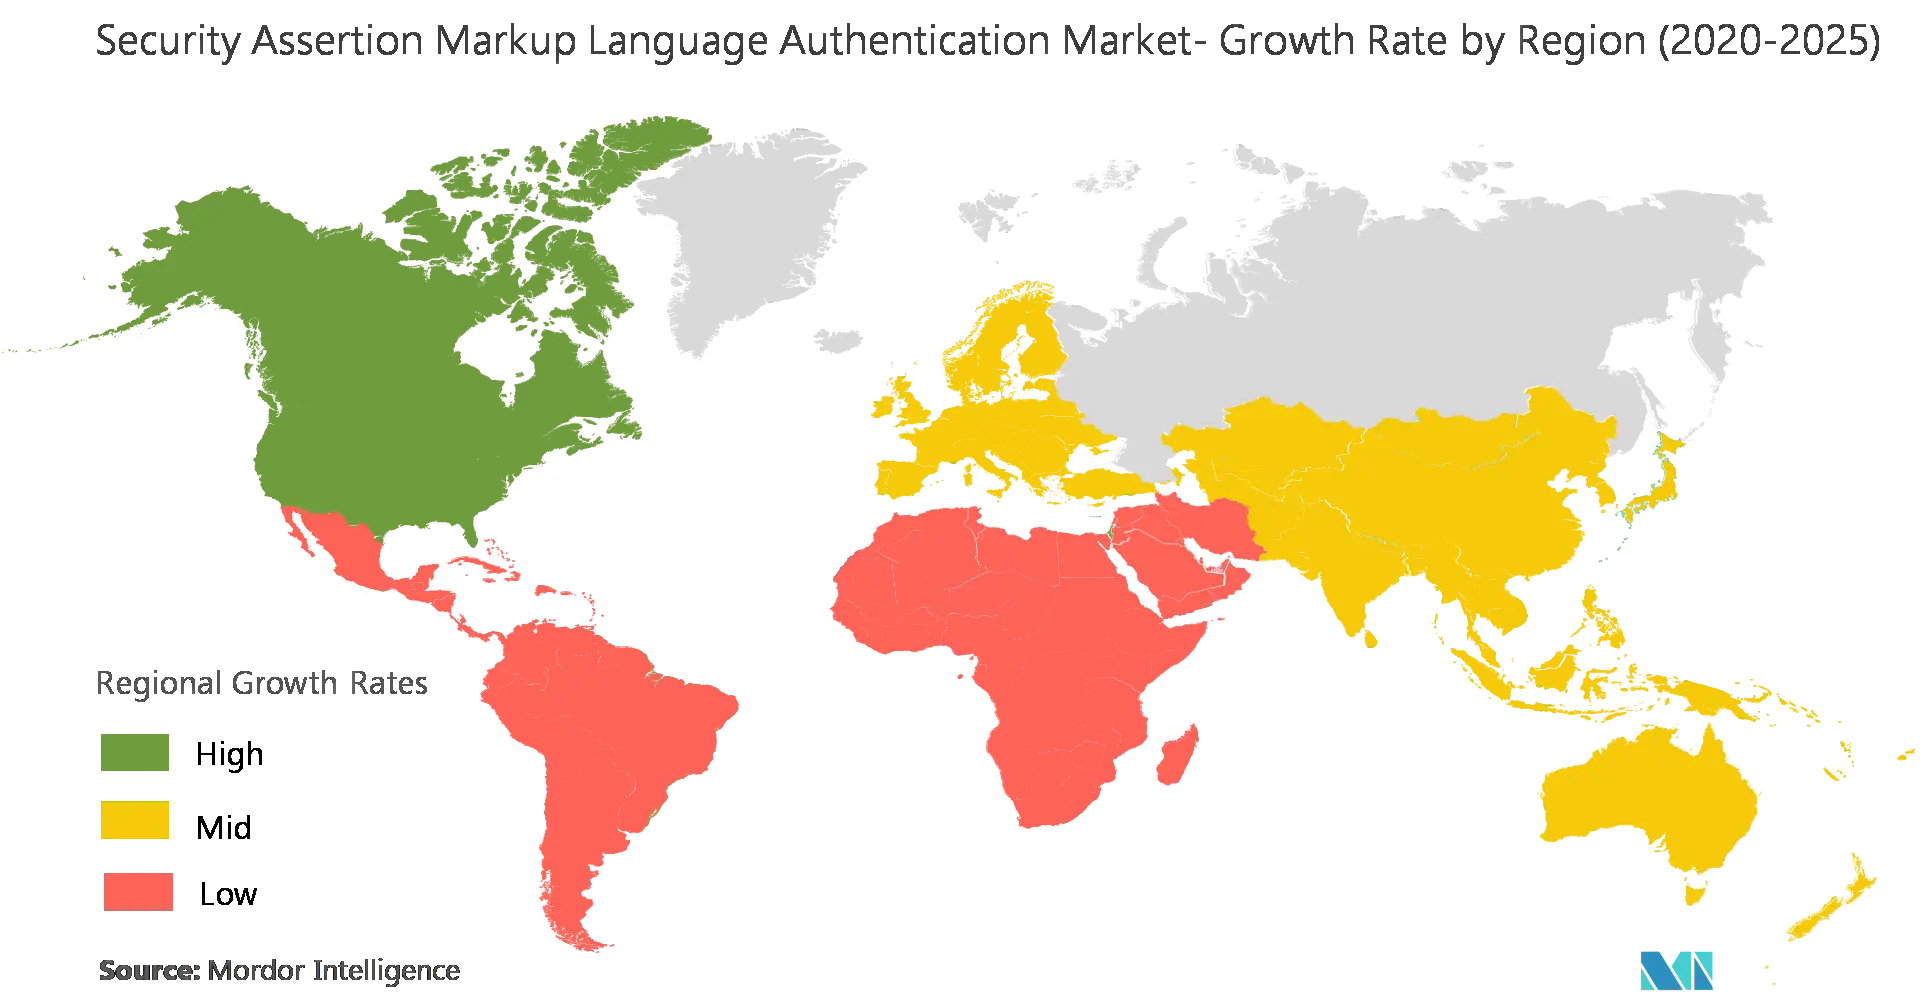 Security Assertion Markup Language Authentication Market - Growth Rate by Region (2020 - 2025)